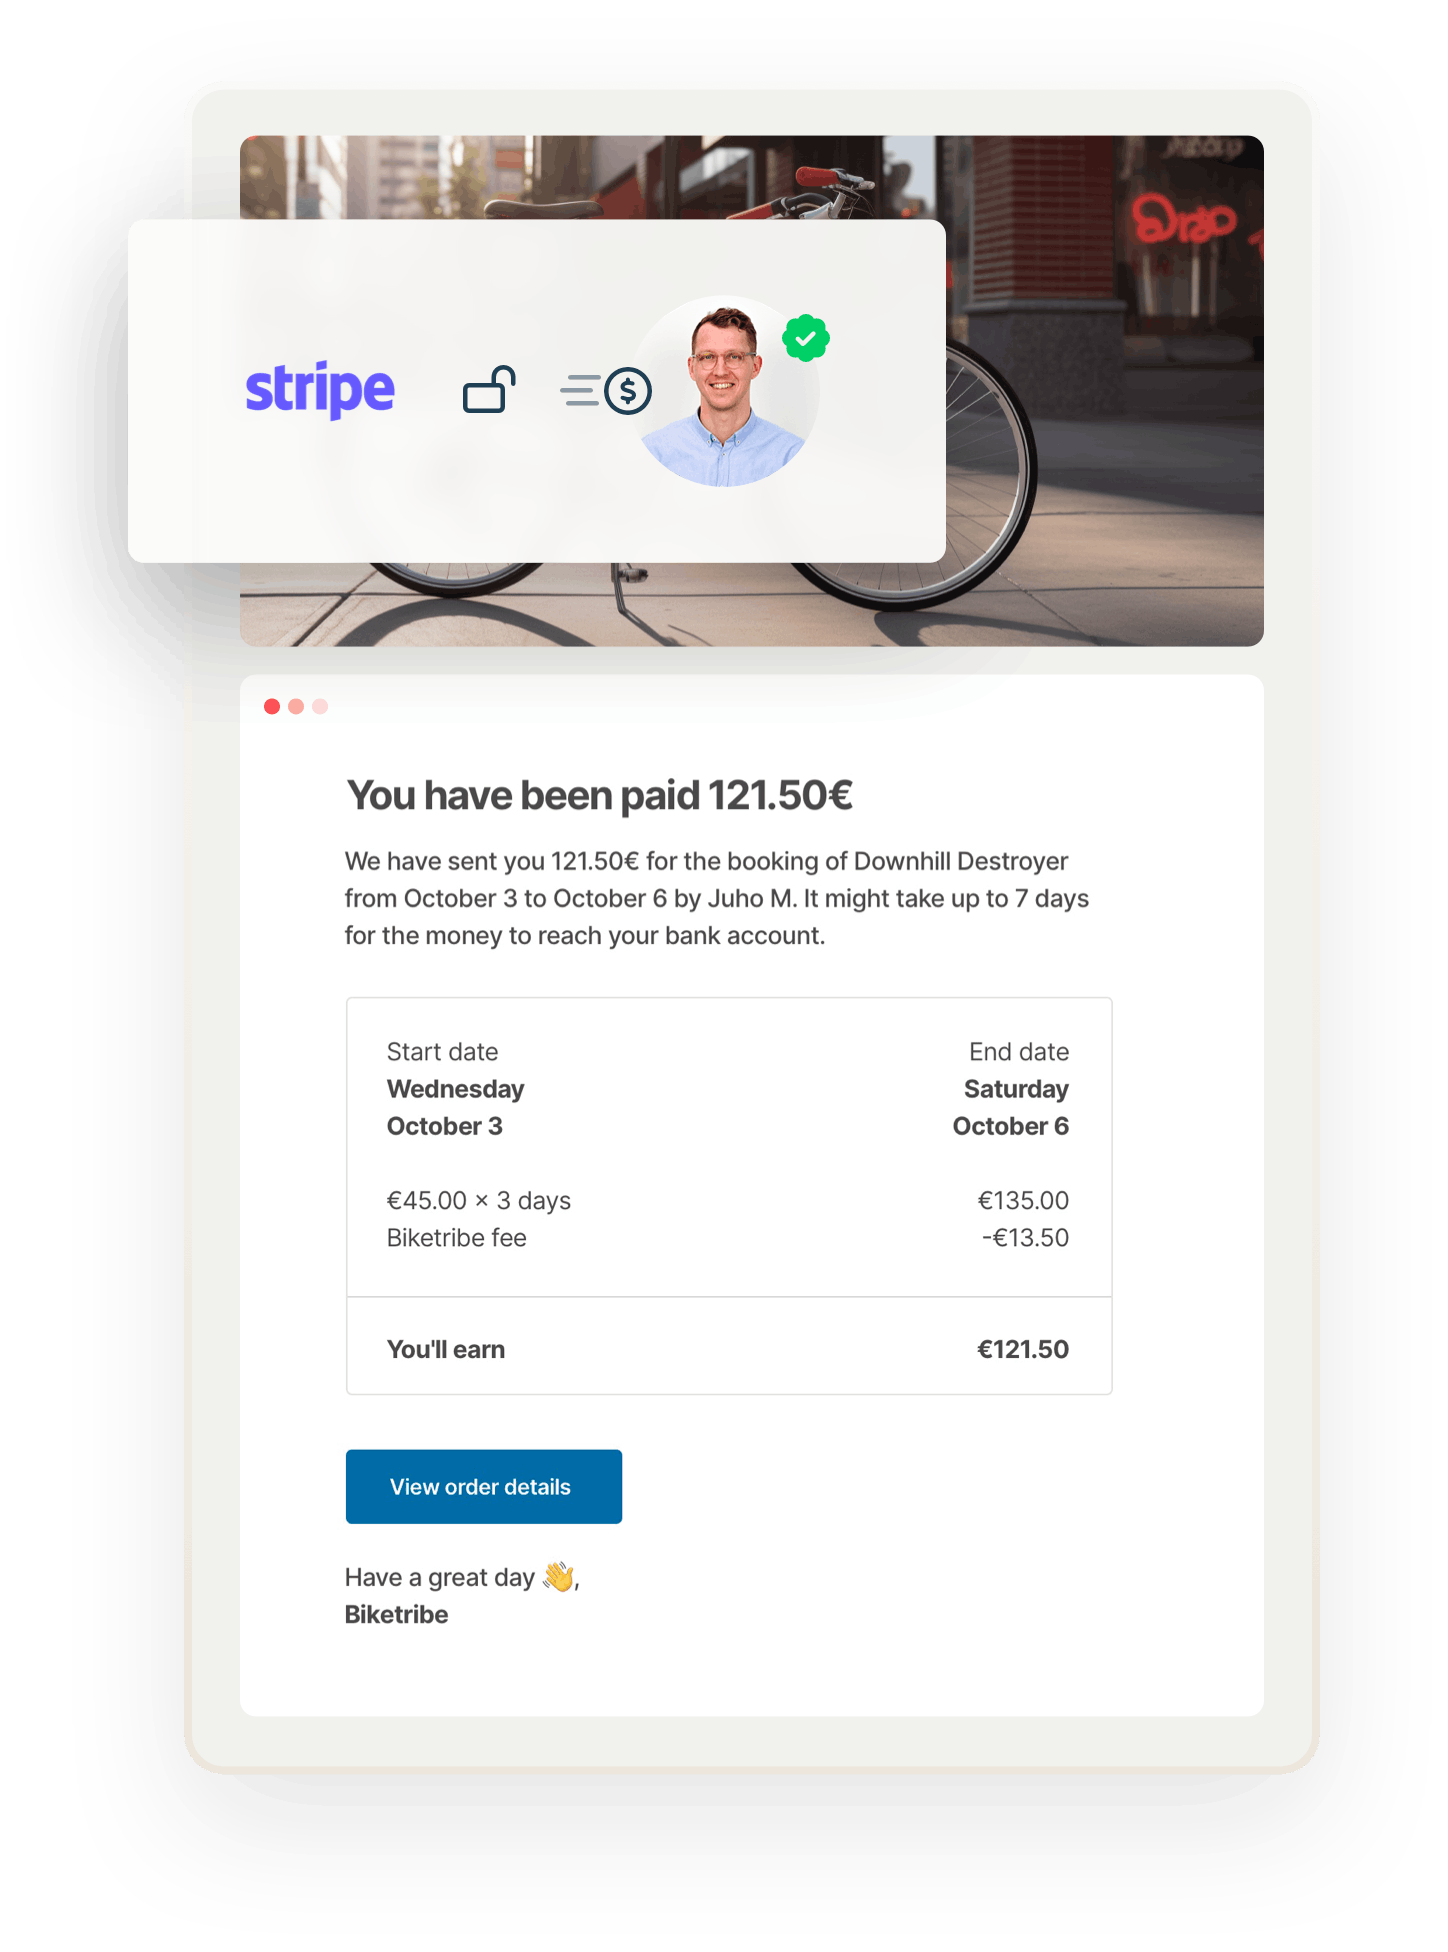 An email notification from the sample marketplace Biketribe tells a bike renter that they've received a payment for a booking. Overlaid is a box with a Stripe logo, an opened lock symbol, and a money transfer symbol, denoting that the funds have been released after payment.